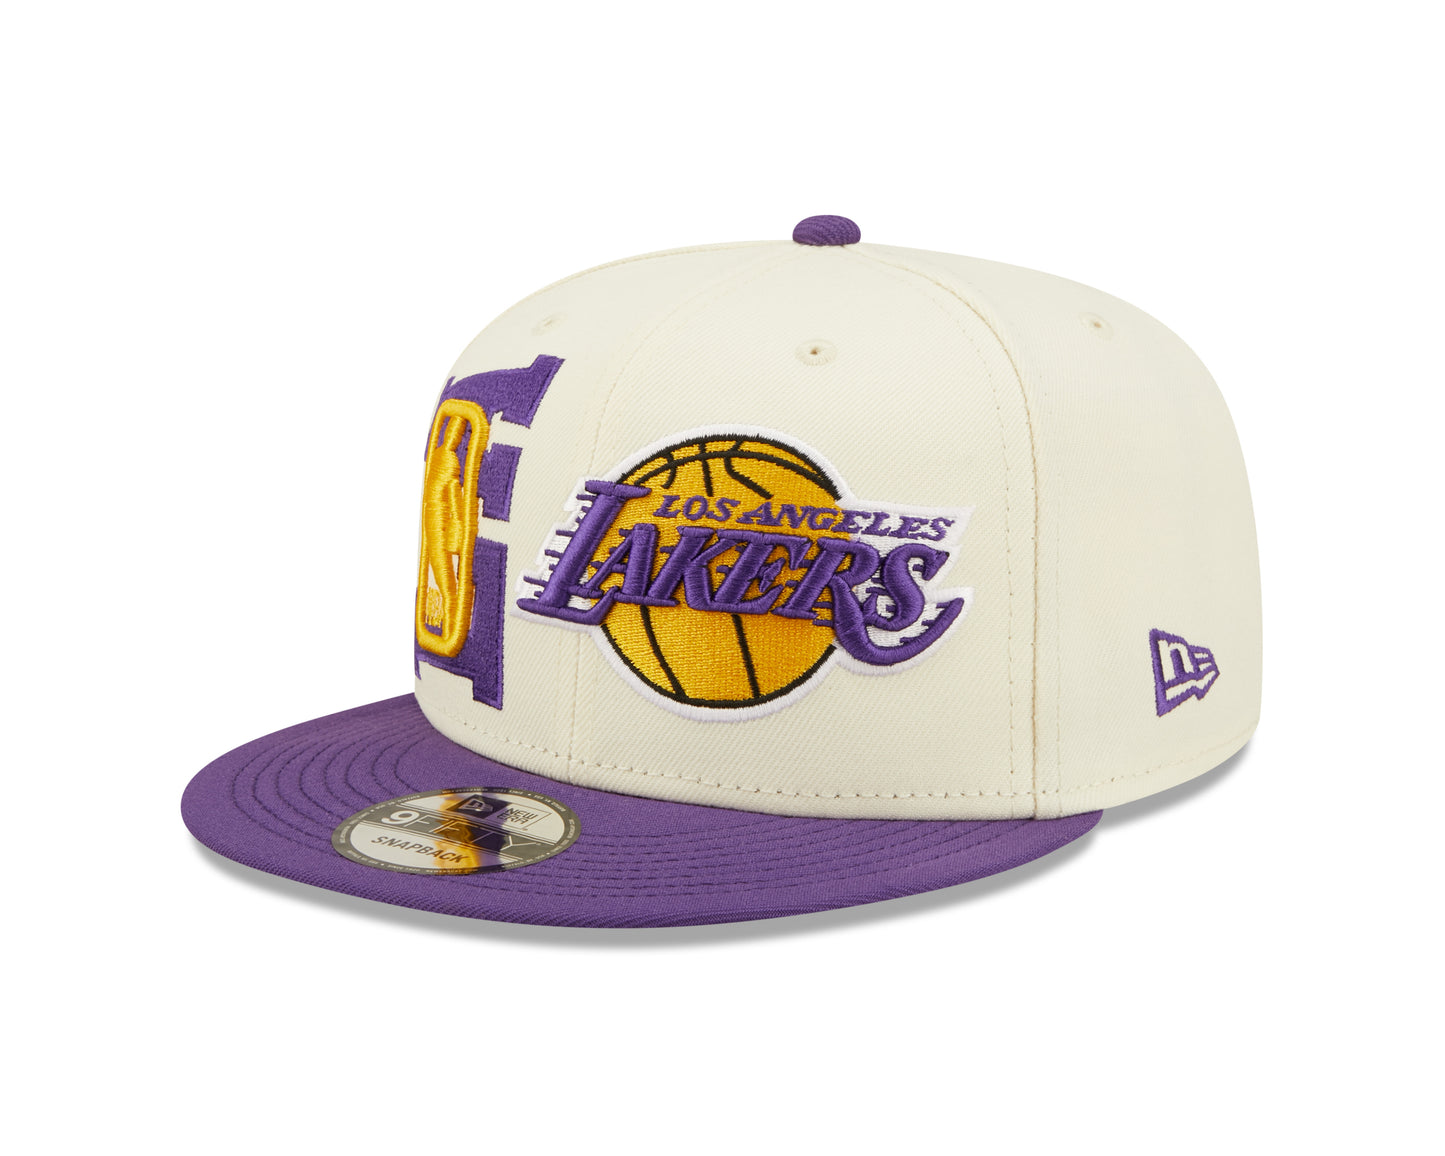 Los Angeles Lakers New Era NBA On Stage Draft 9fifty Snapback Hat- Cream